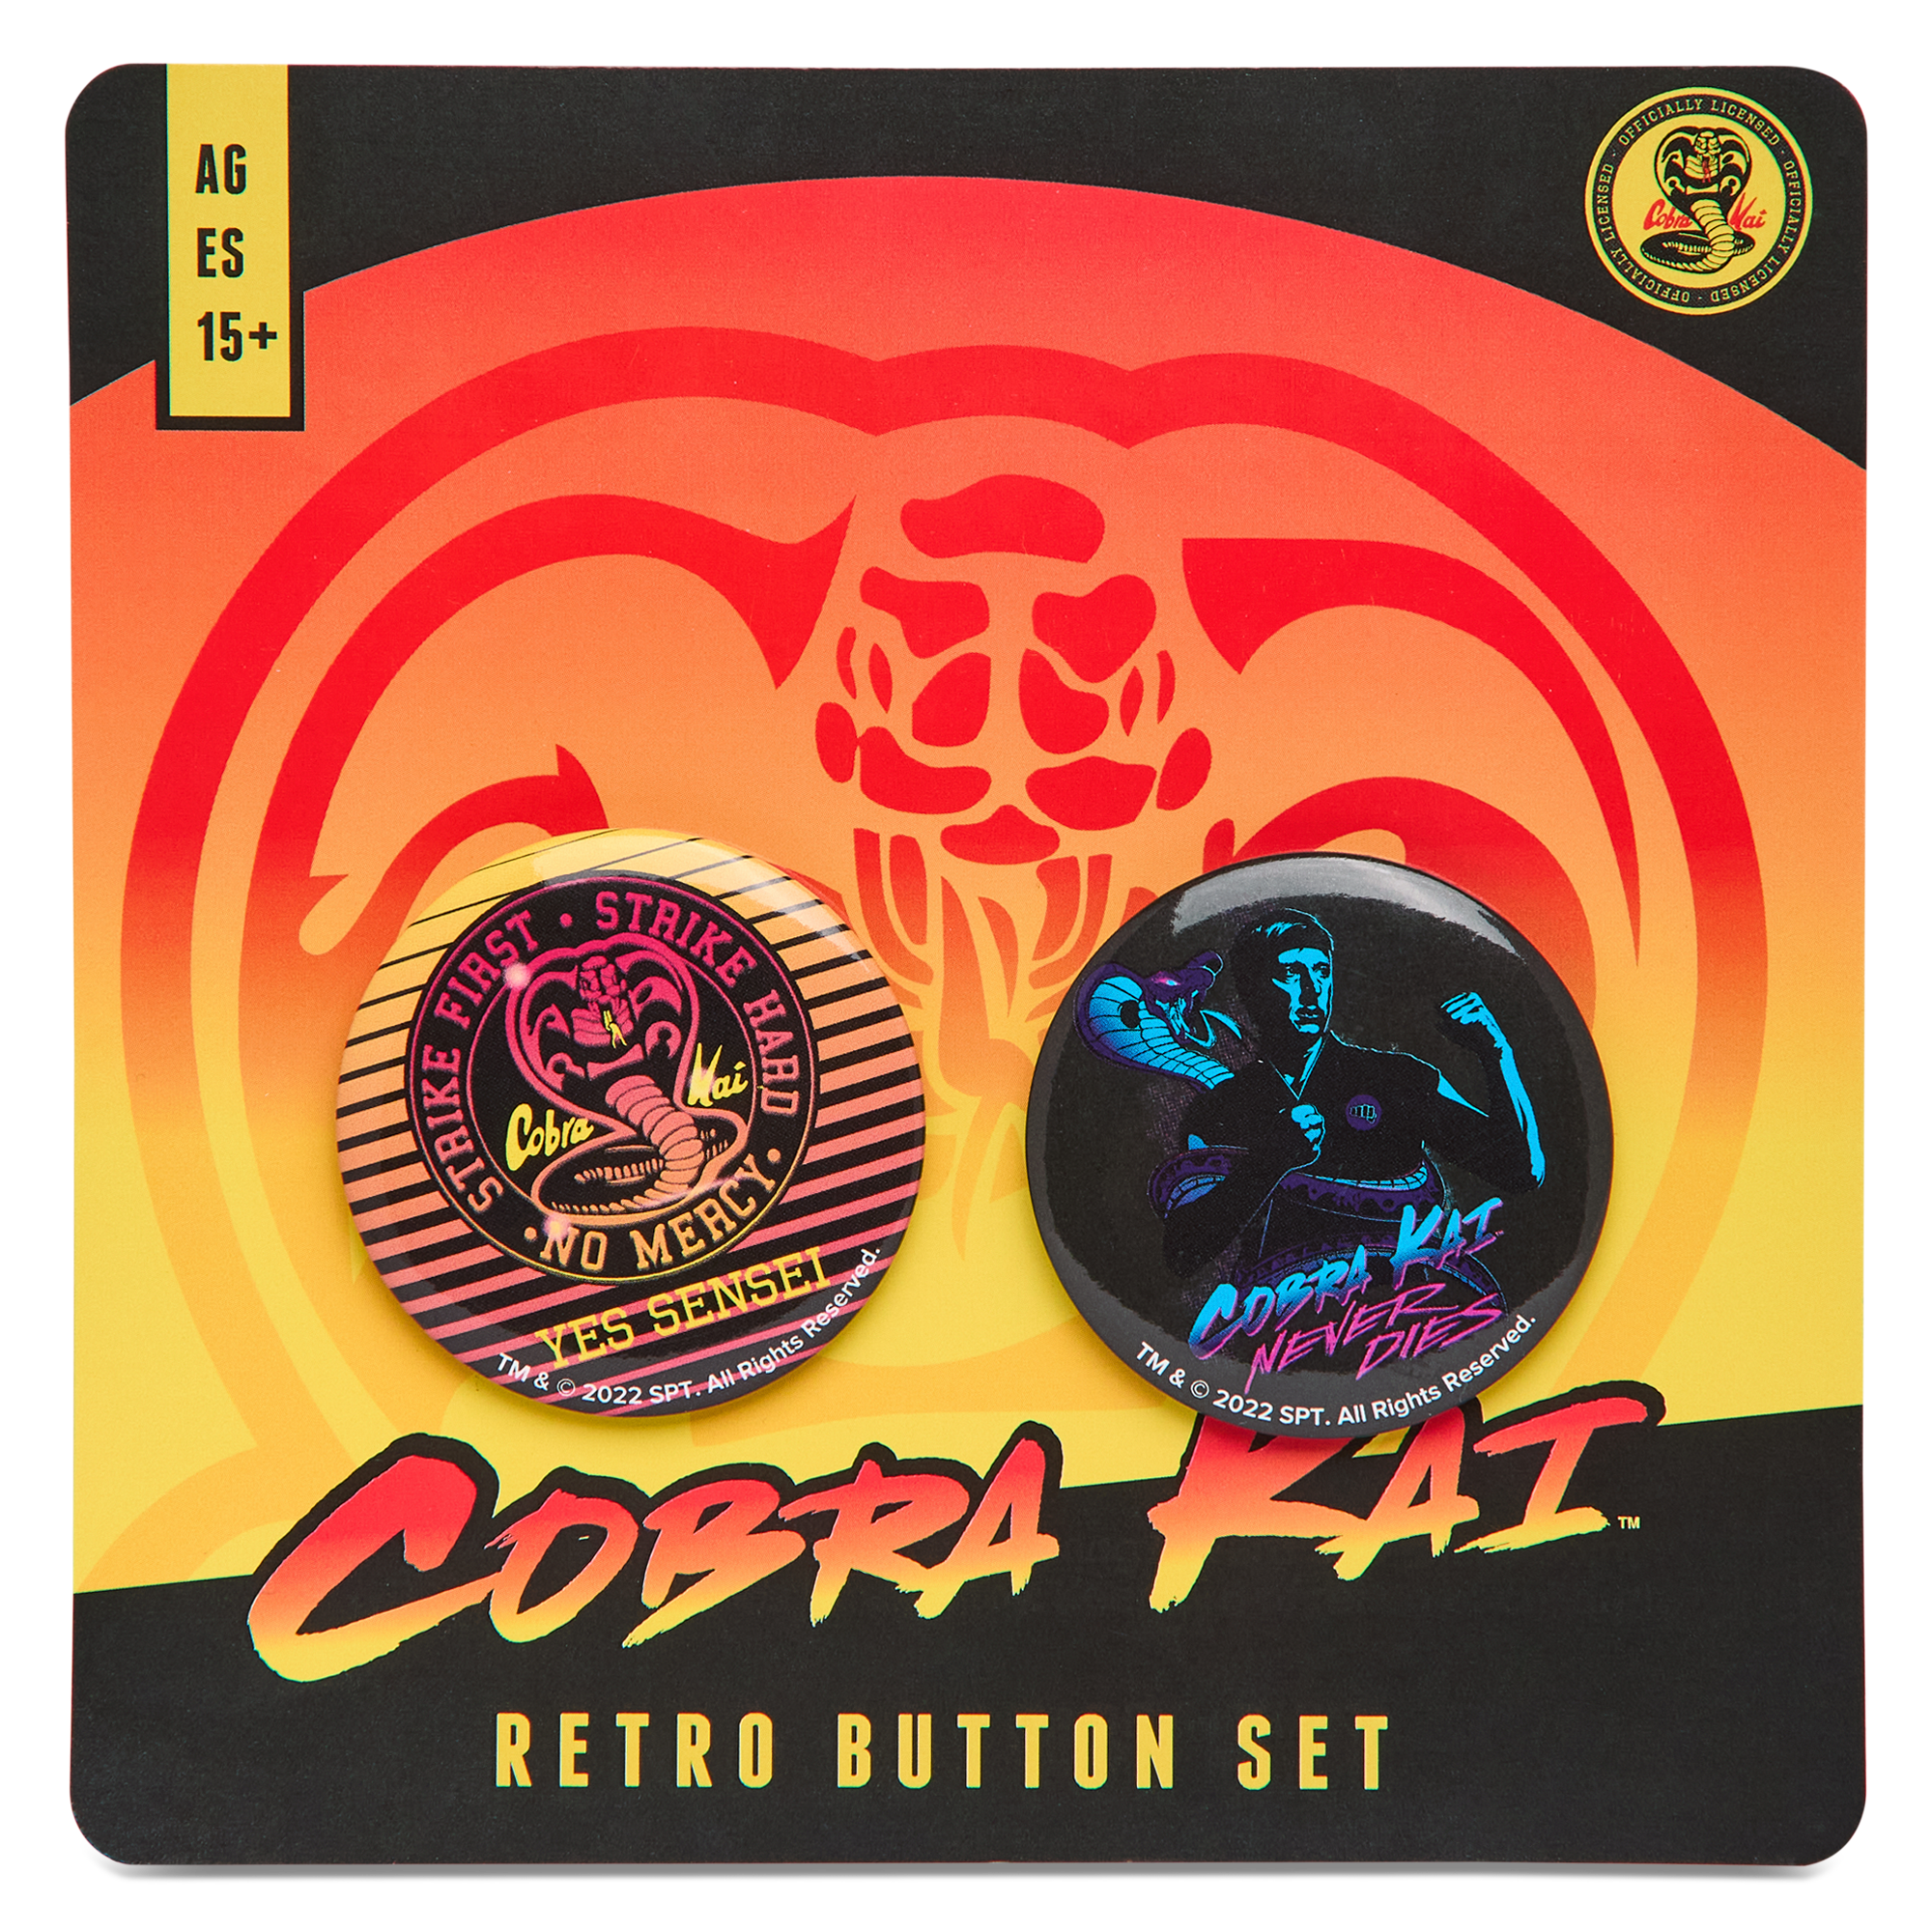 Cobra Kai Limited Edition Crate Series